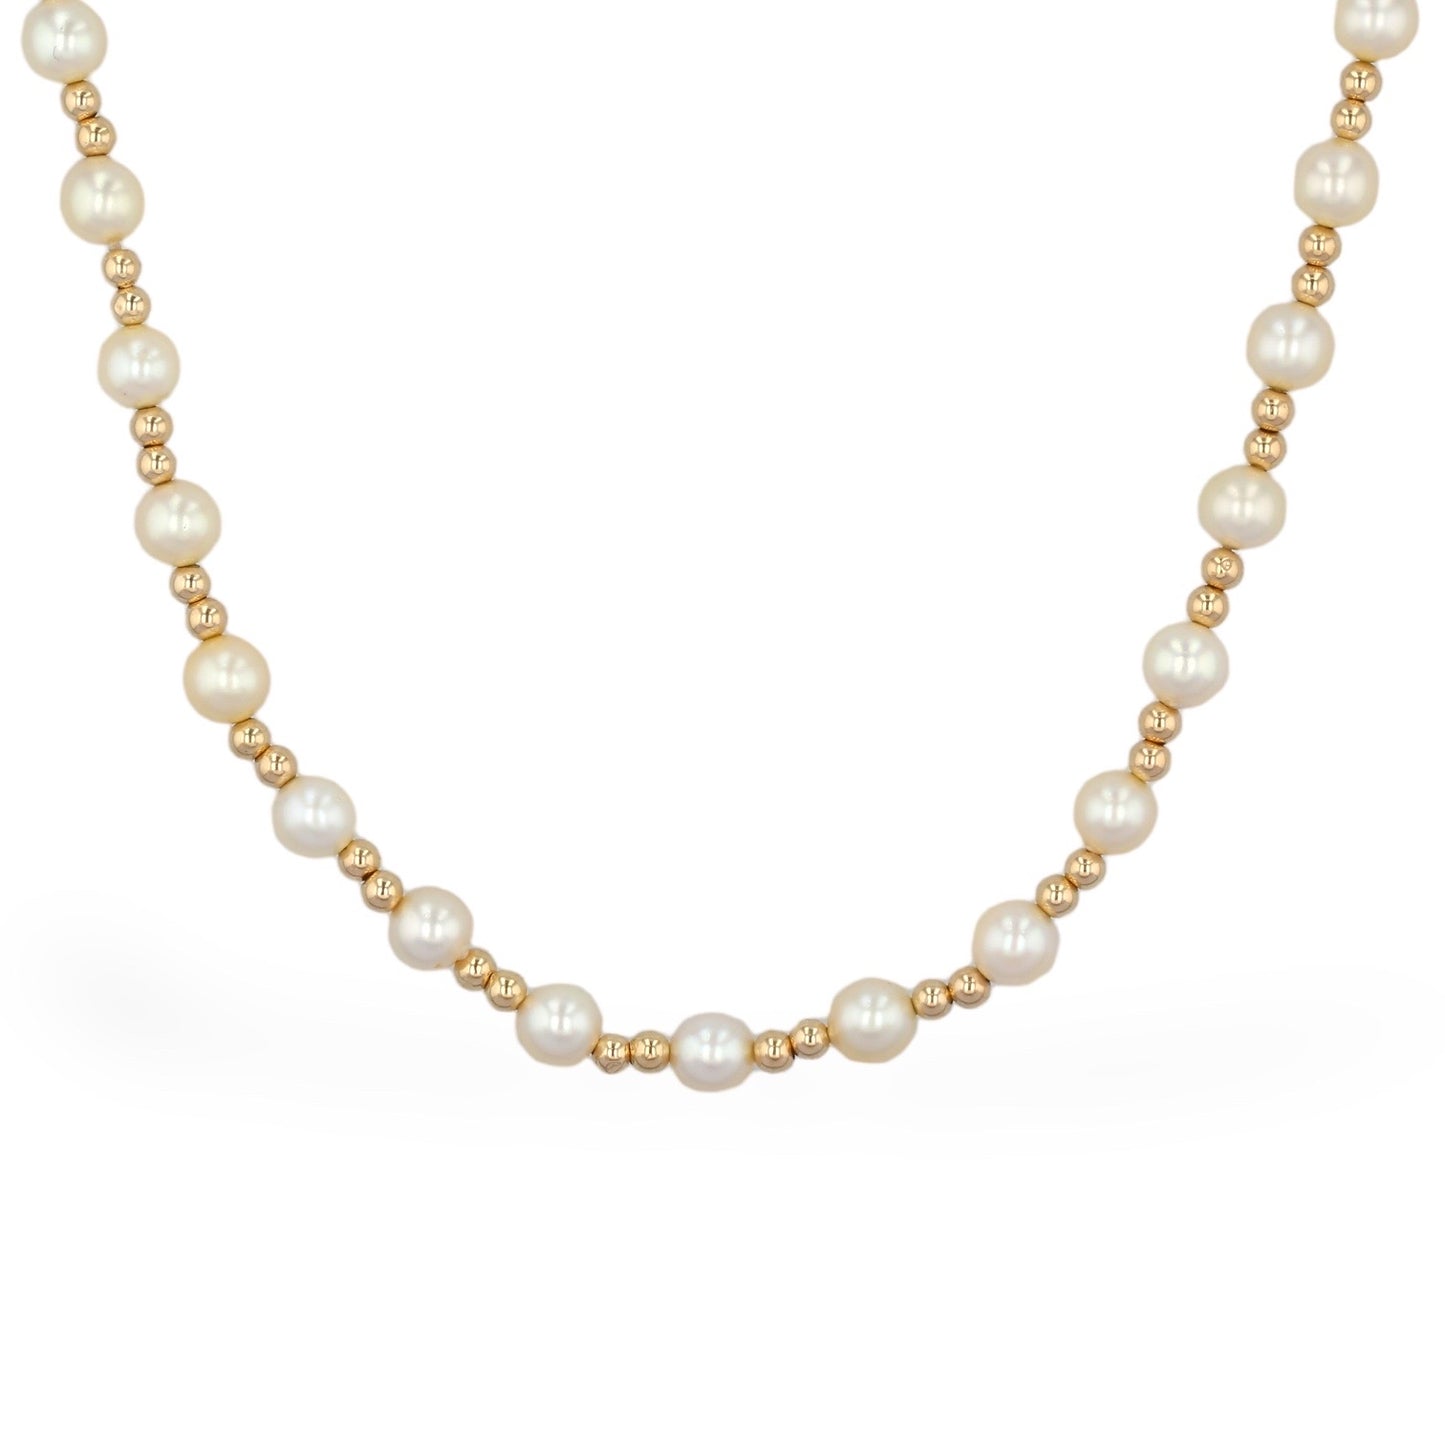 14k yellow gold bead Japanese pearl necklace